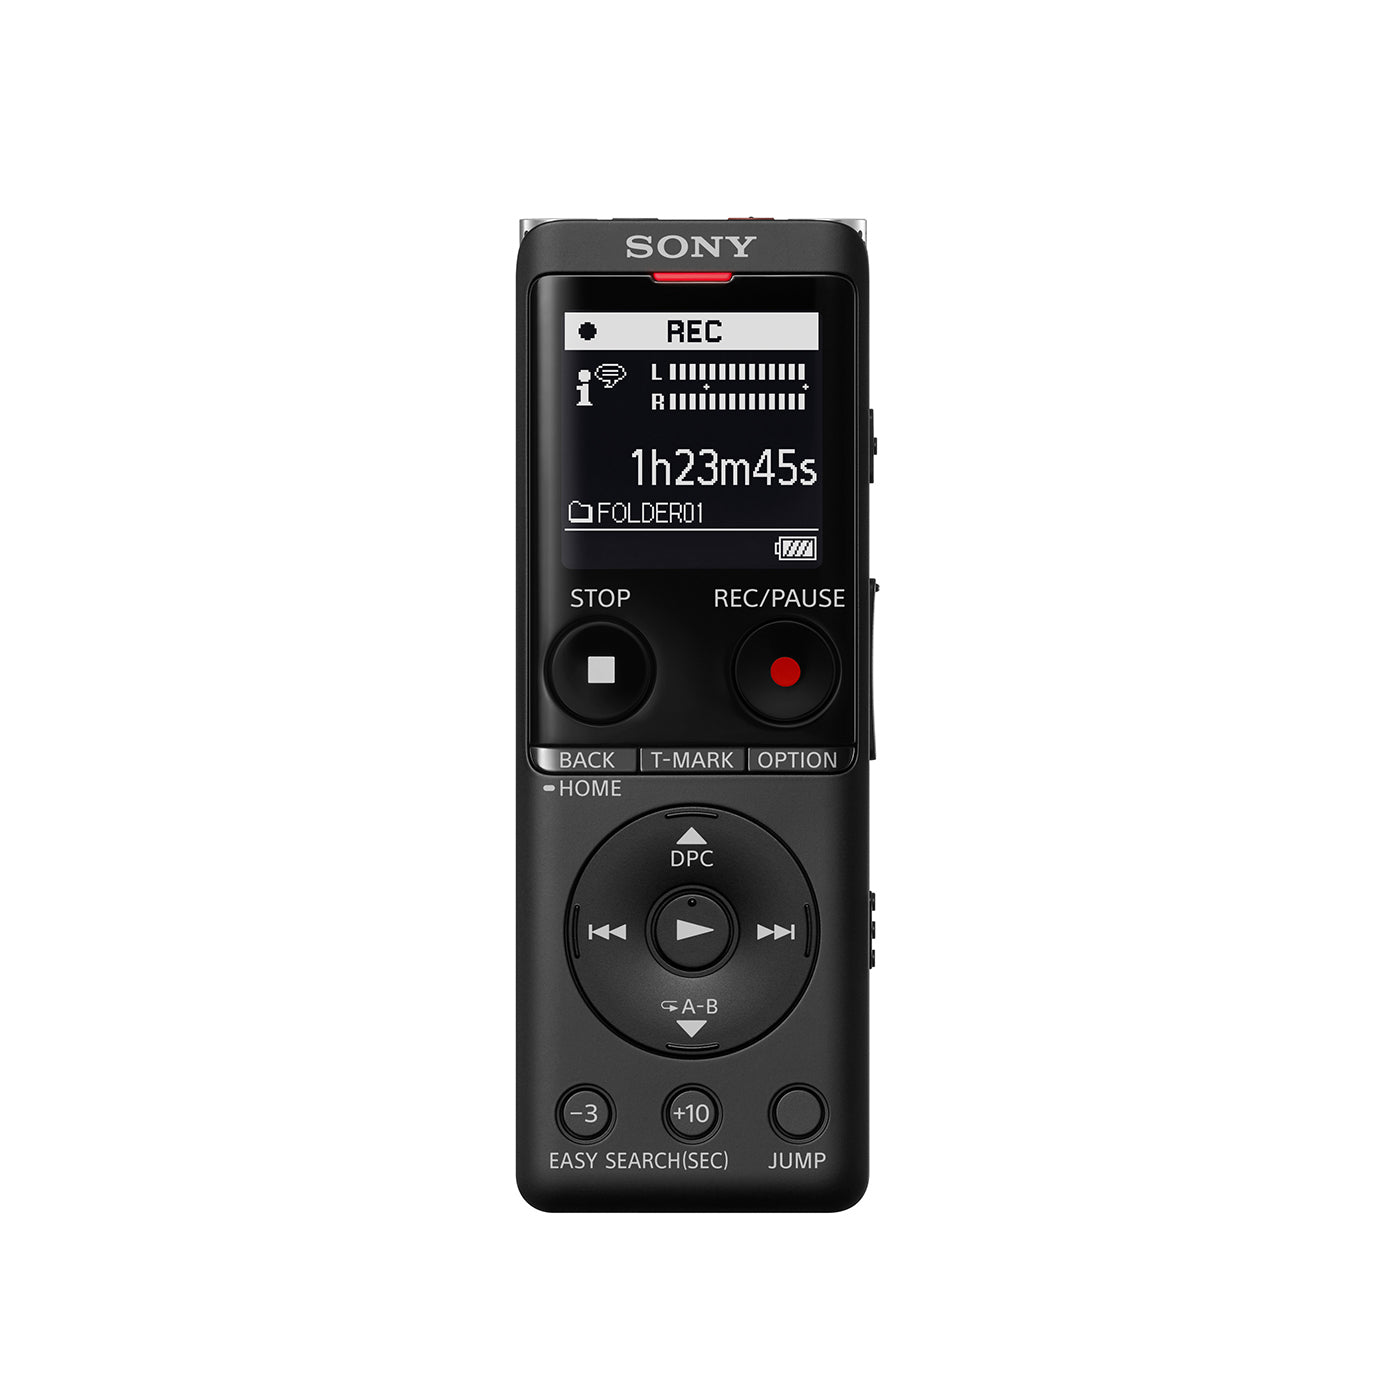 Sony ICD-UX570F Light Weight Voice Recorder, with 20hours Battery Life, 4GB Built-in Memory -Black